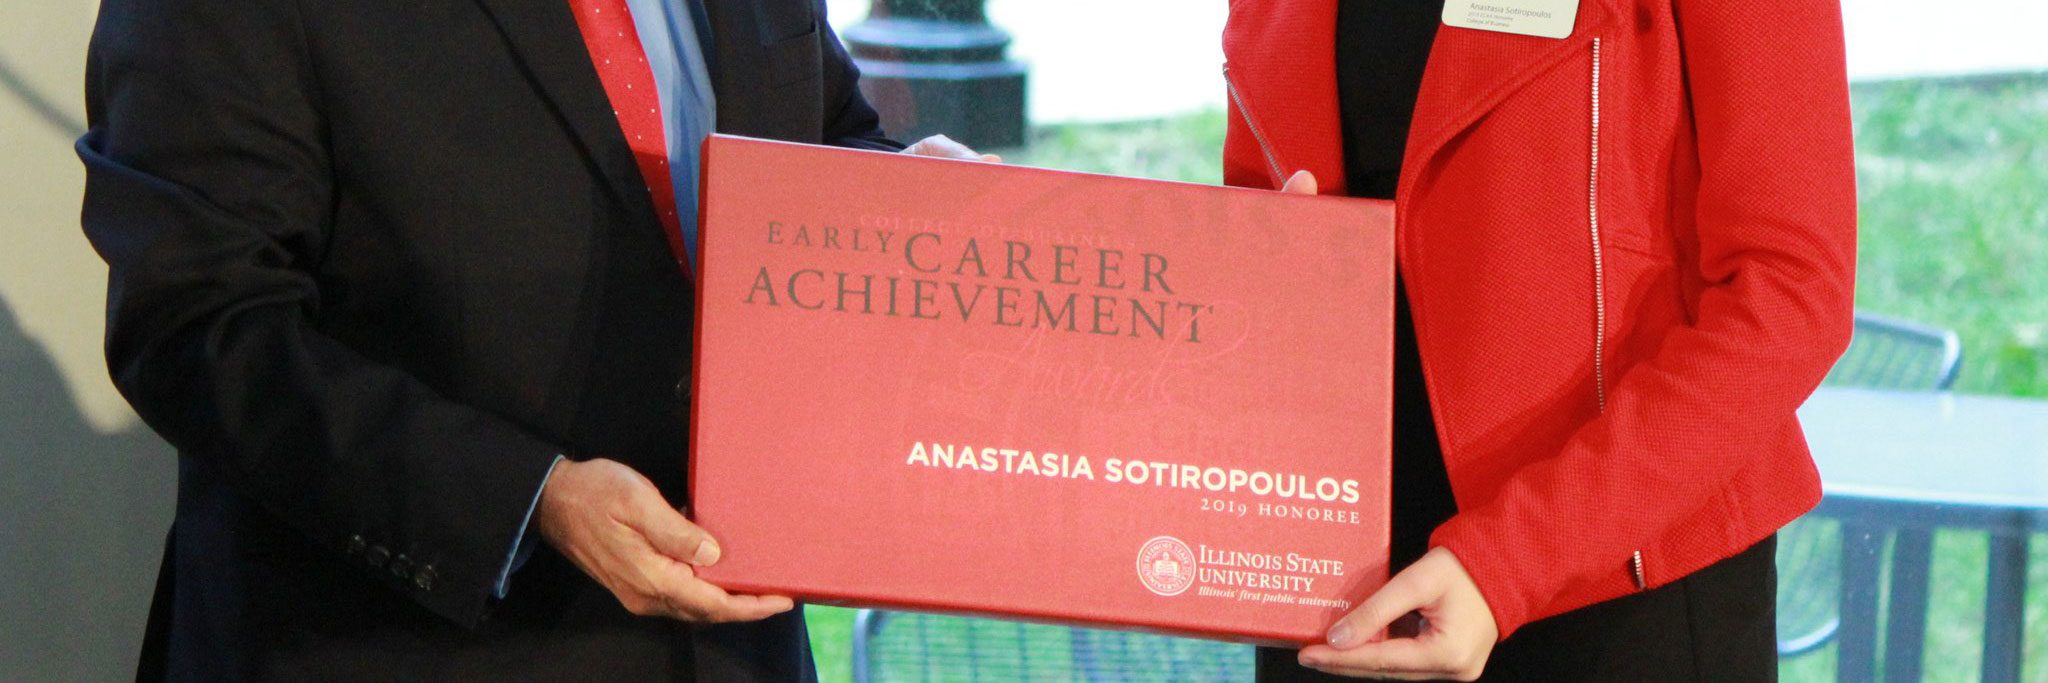 Student Anastasia Sotiropoulos receiving an Early Career Achievement Awards.